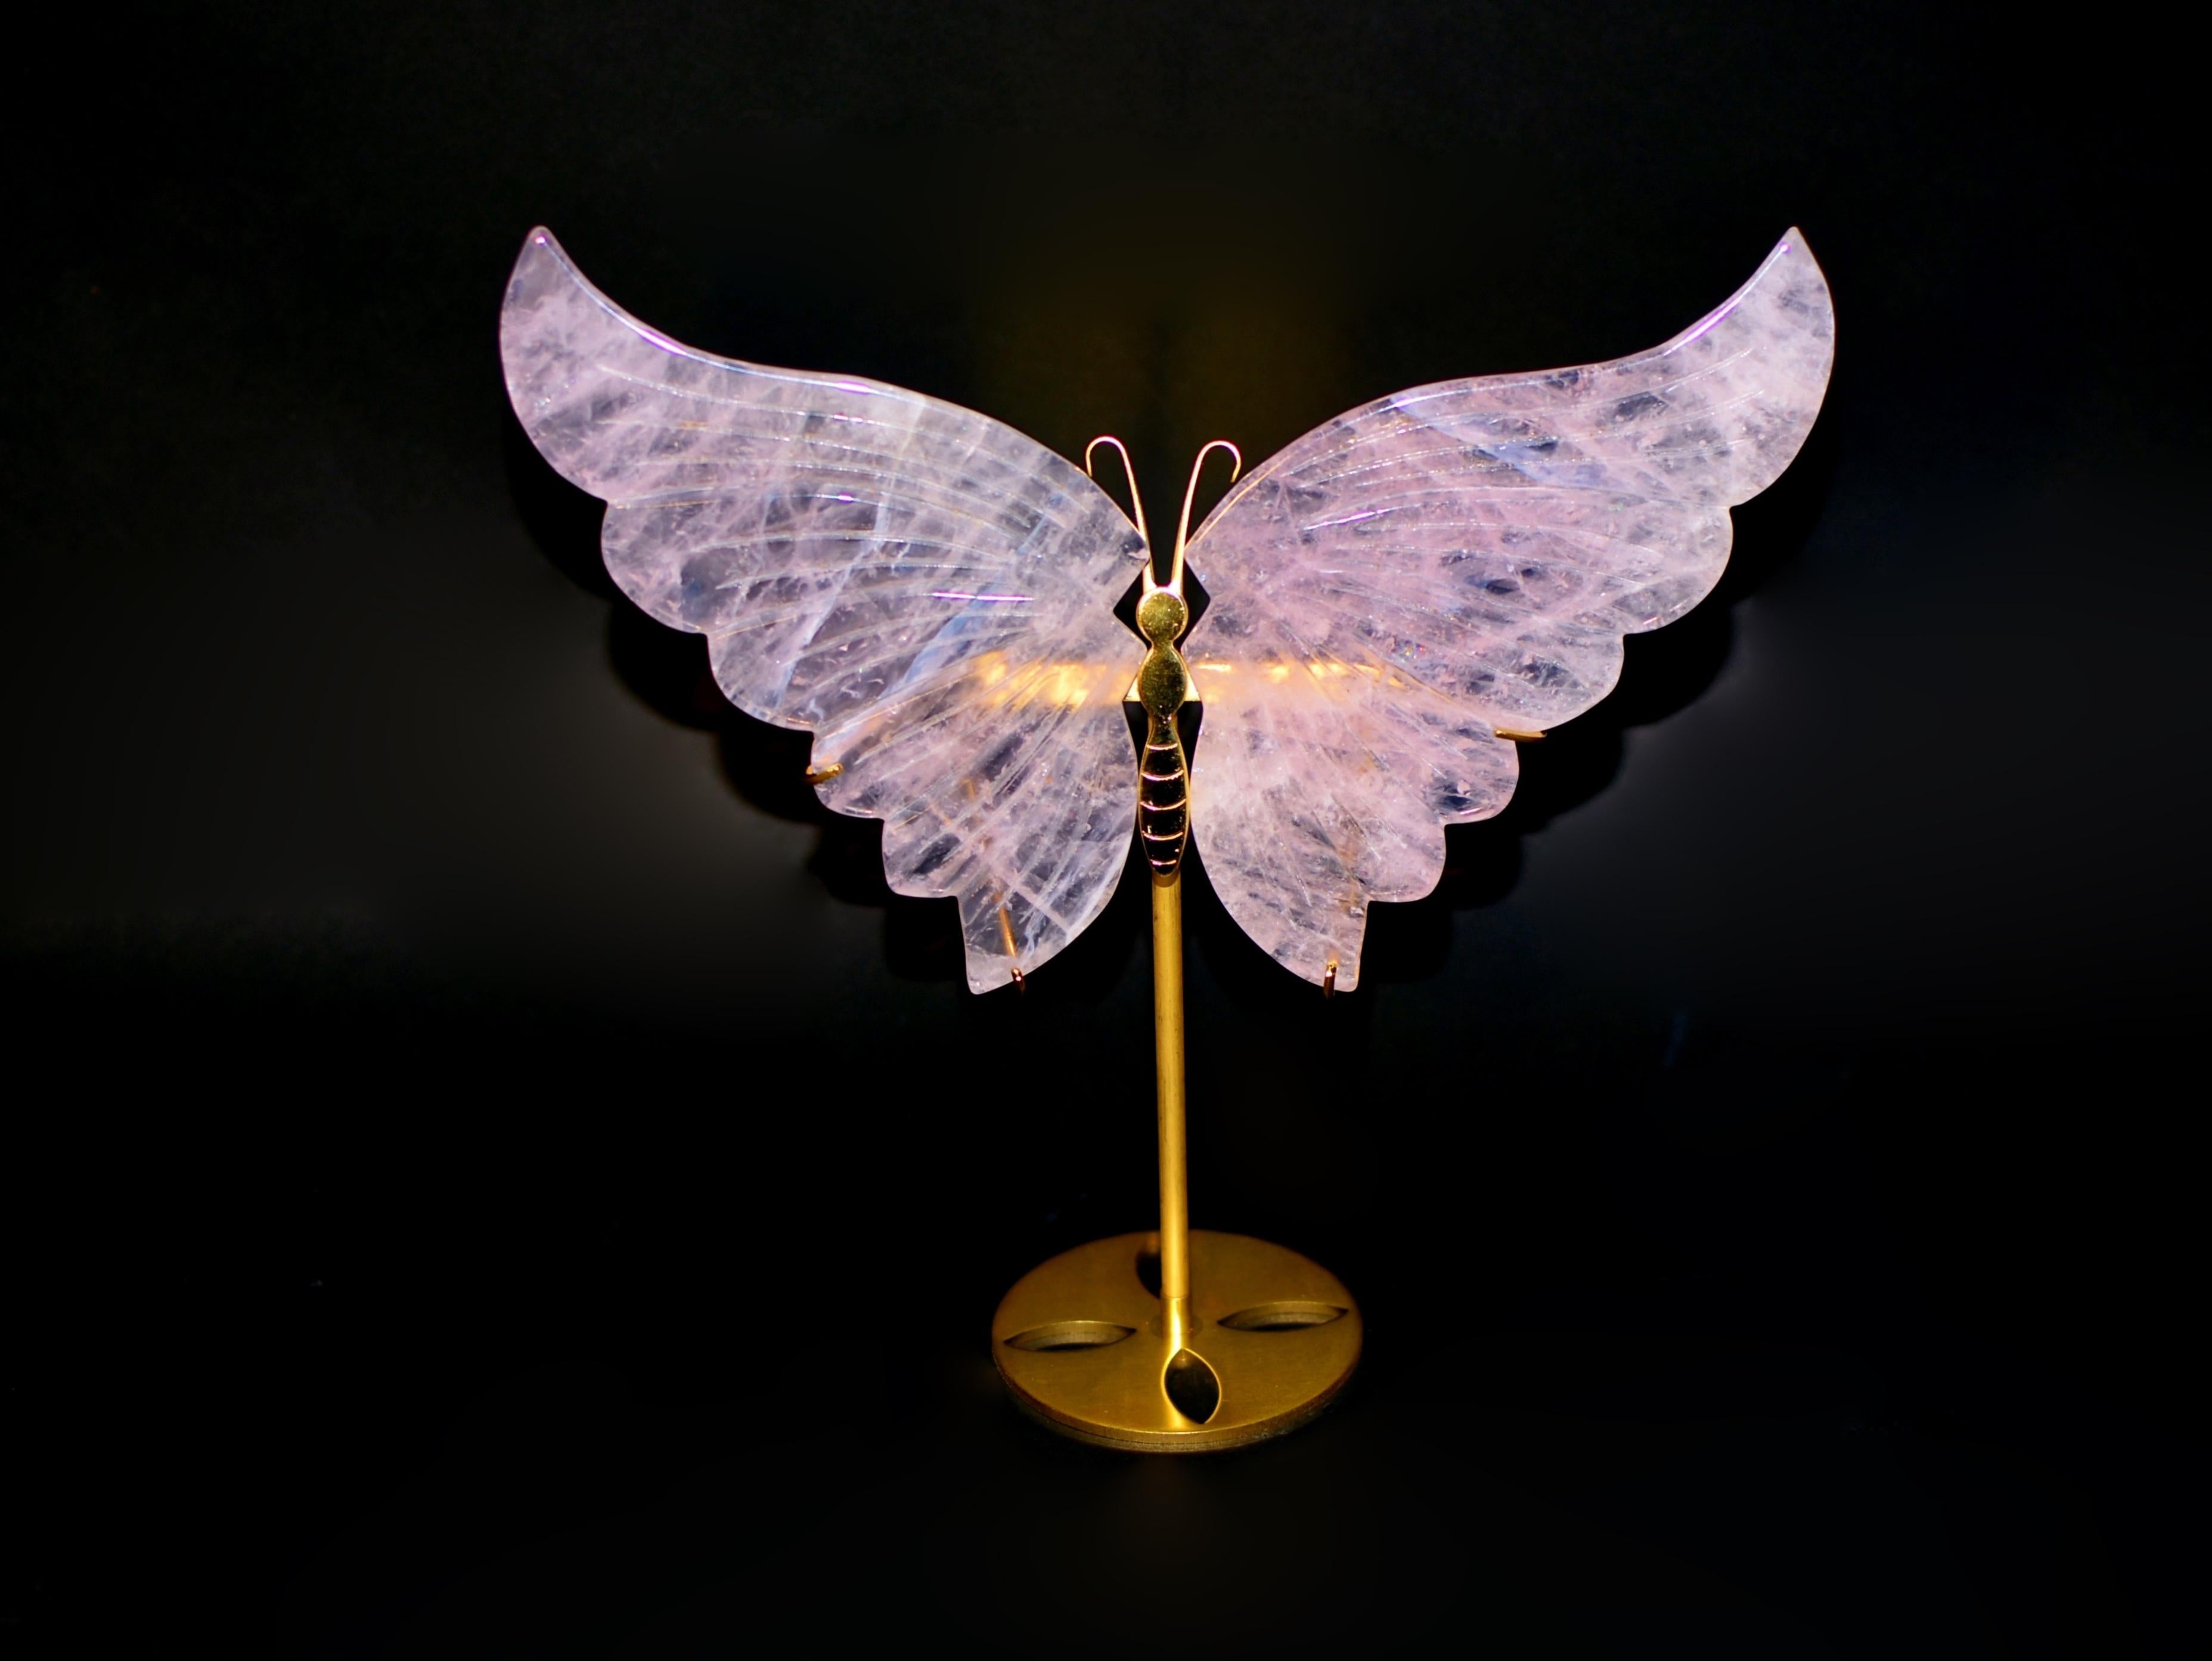 Delight in the ethereal beauty of a breathtaking sculpture – a rose quartz butterfly crafted with meticulous artistry. Wings carved from the finest grade, all-natural Madagascar rose quartz, are a testament to the skill of the sculptor, capturing a